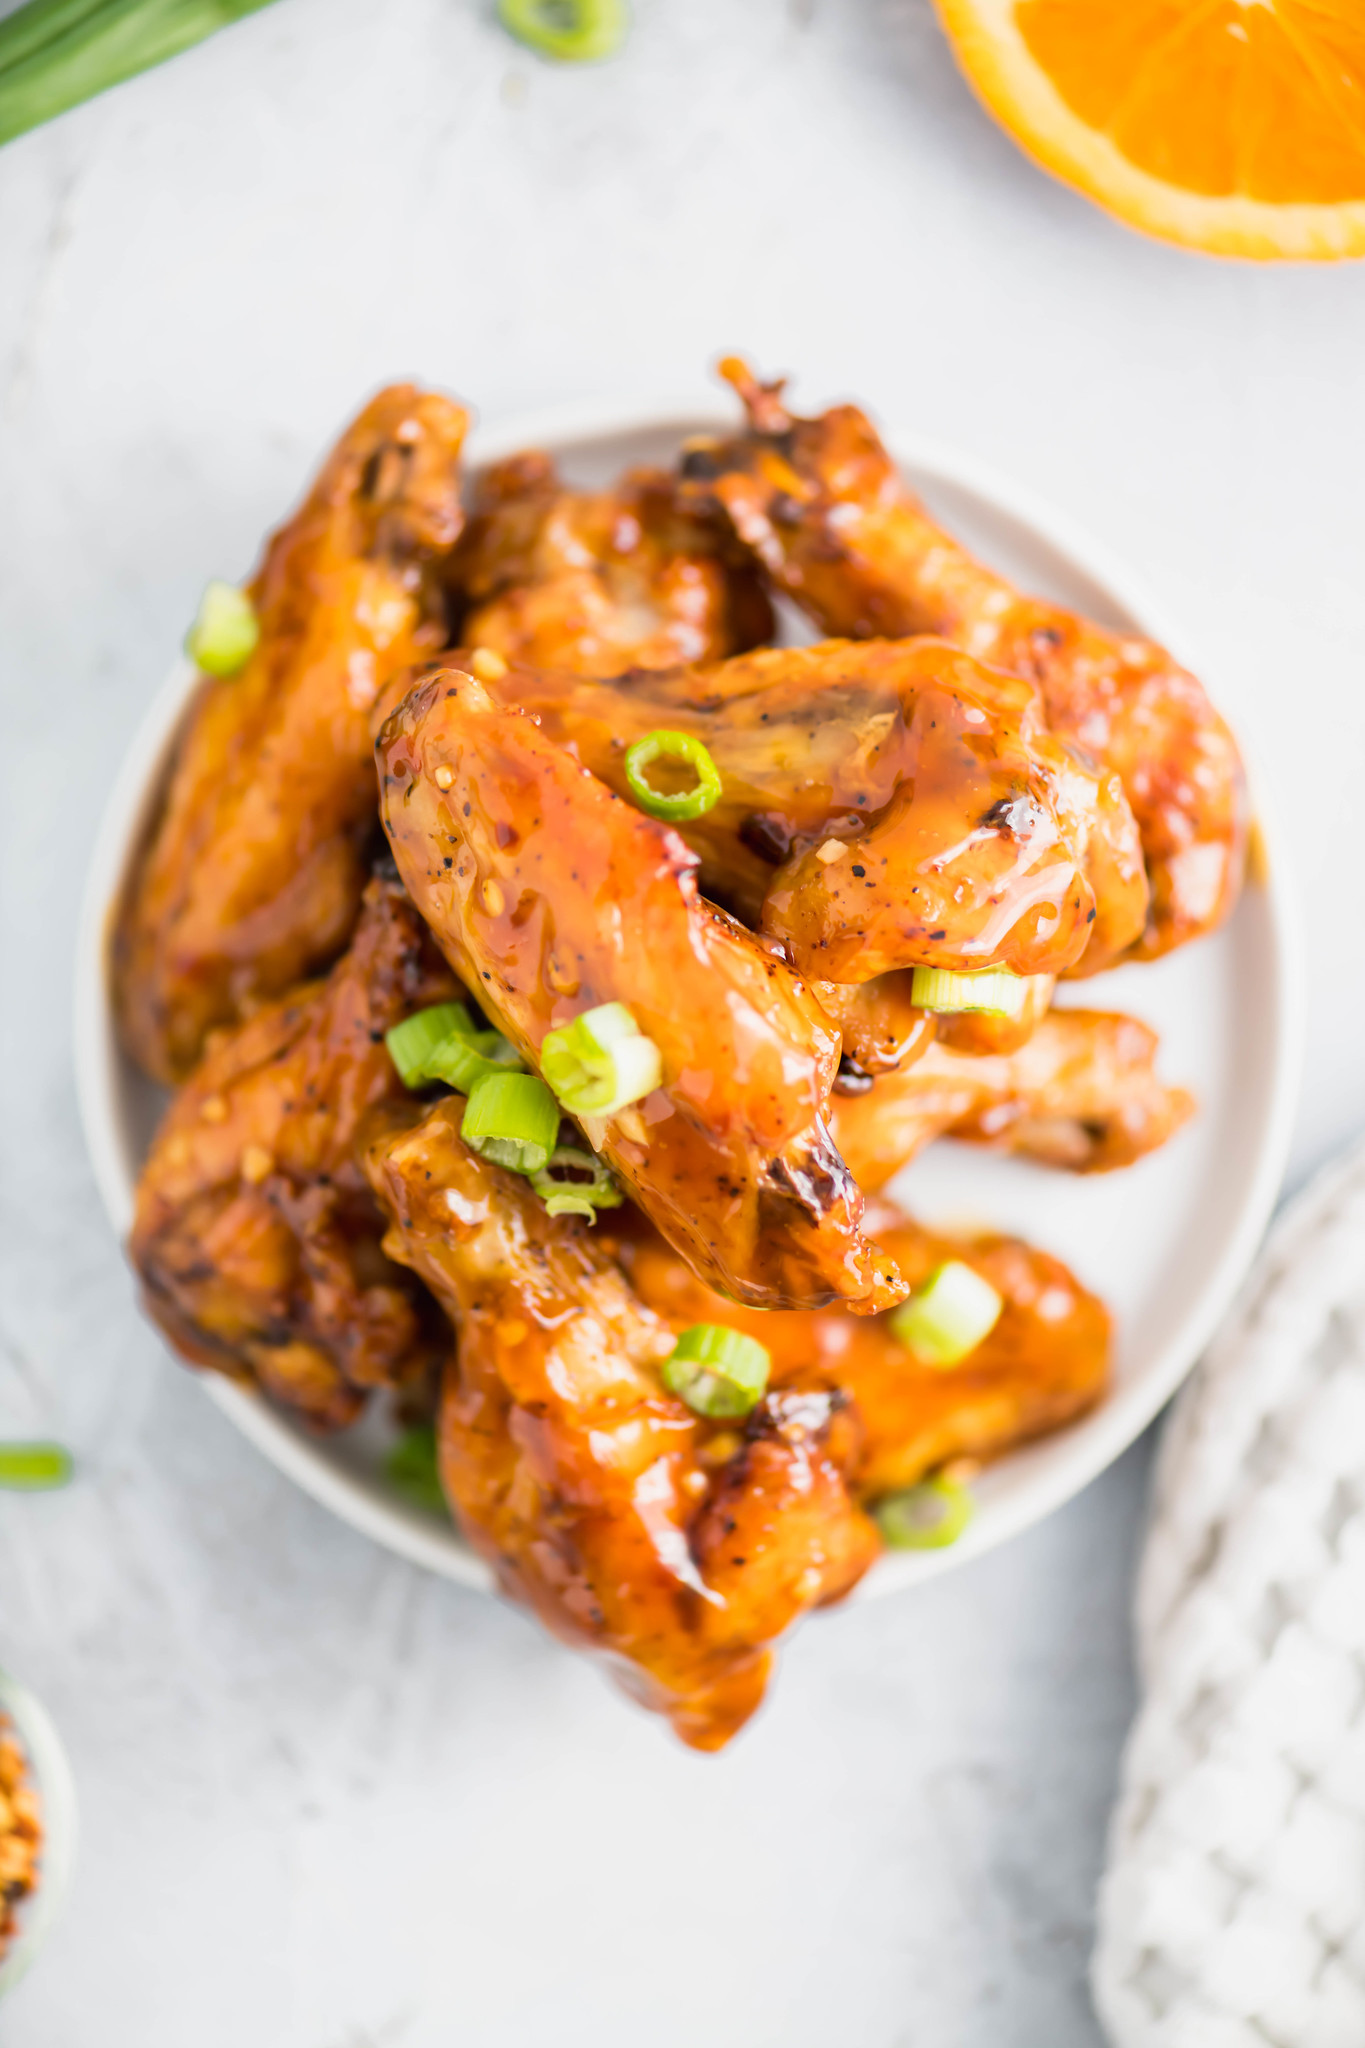 Need a fun and flavorful chicken wing recipe for the Super Bowl? These Orange Chicken Wings are packed with bright, spicy flavor.